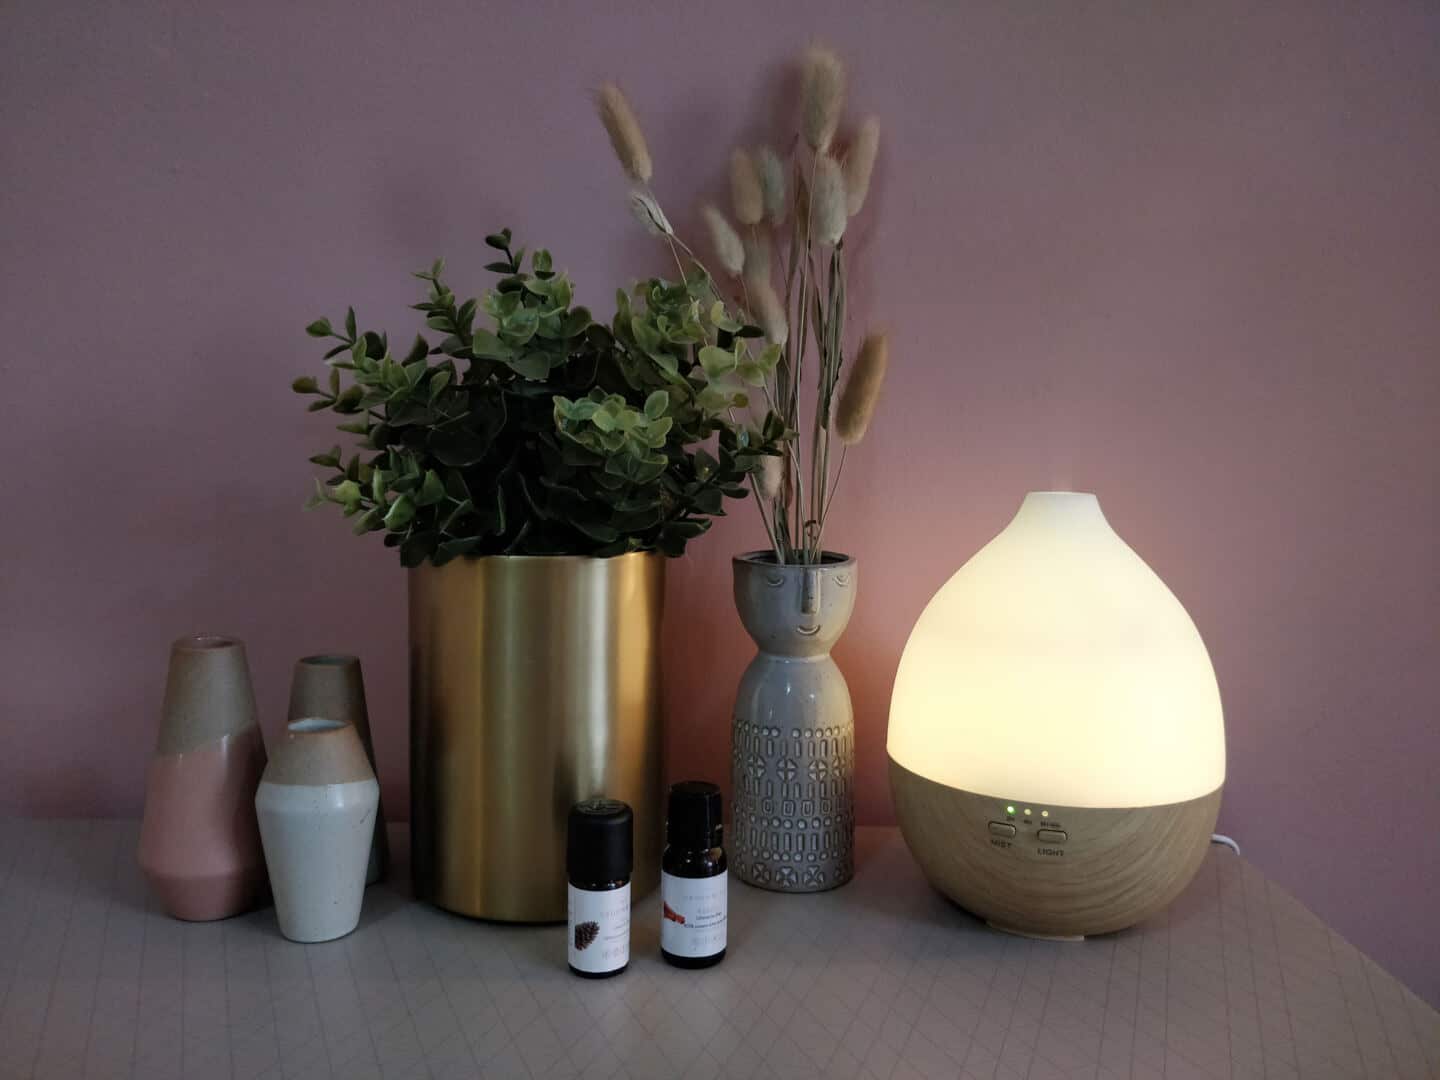 Smellacloud aroma diffuser with the yellow LED light illuminated